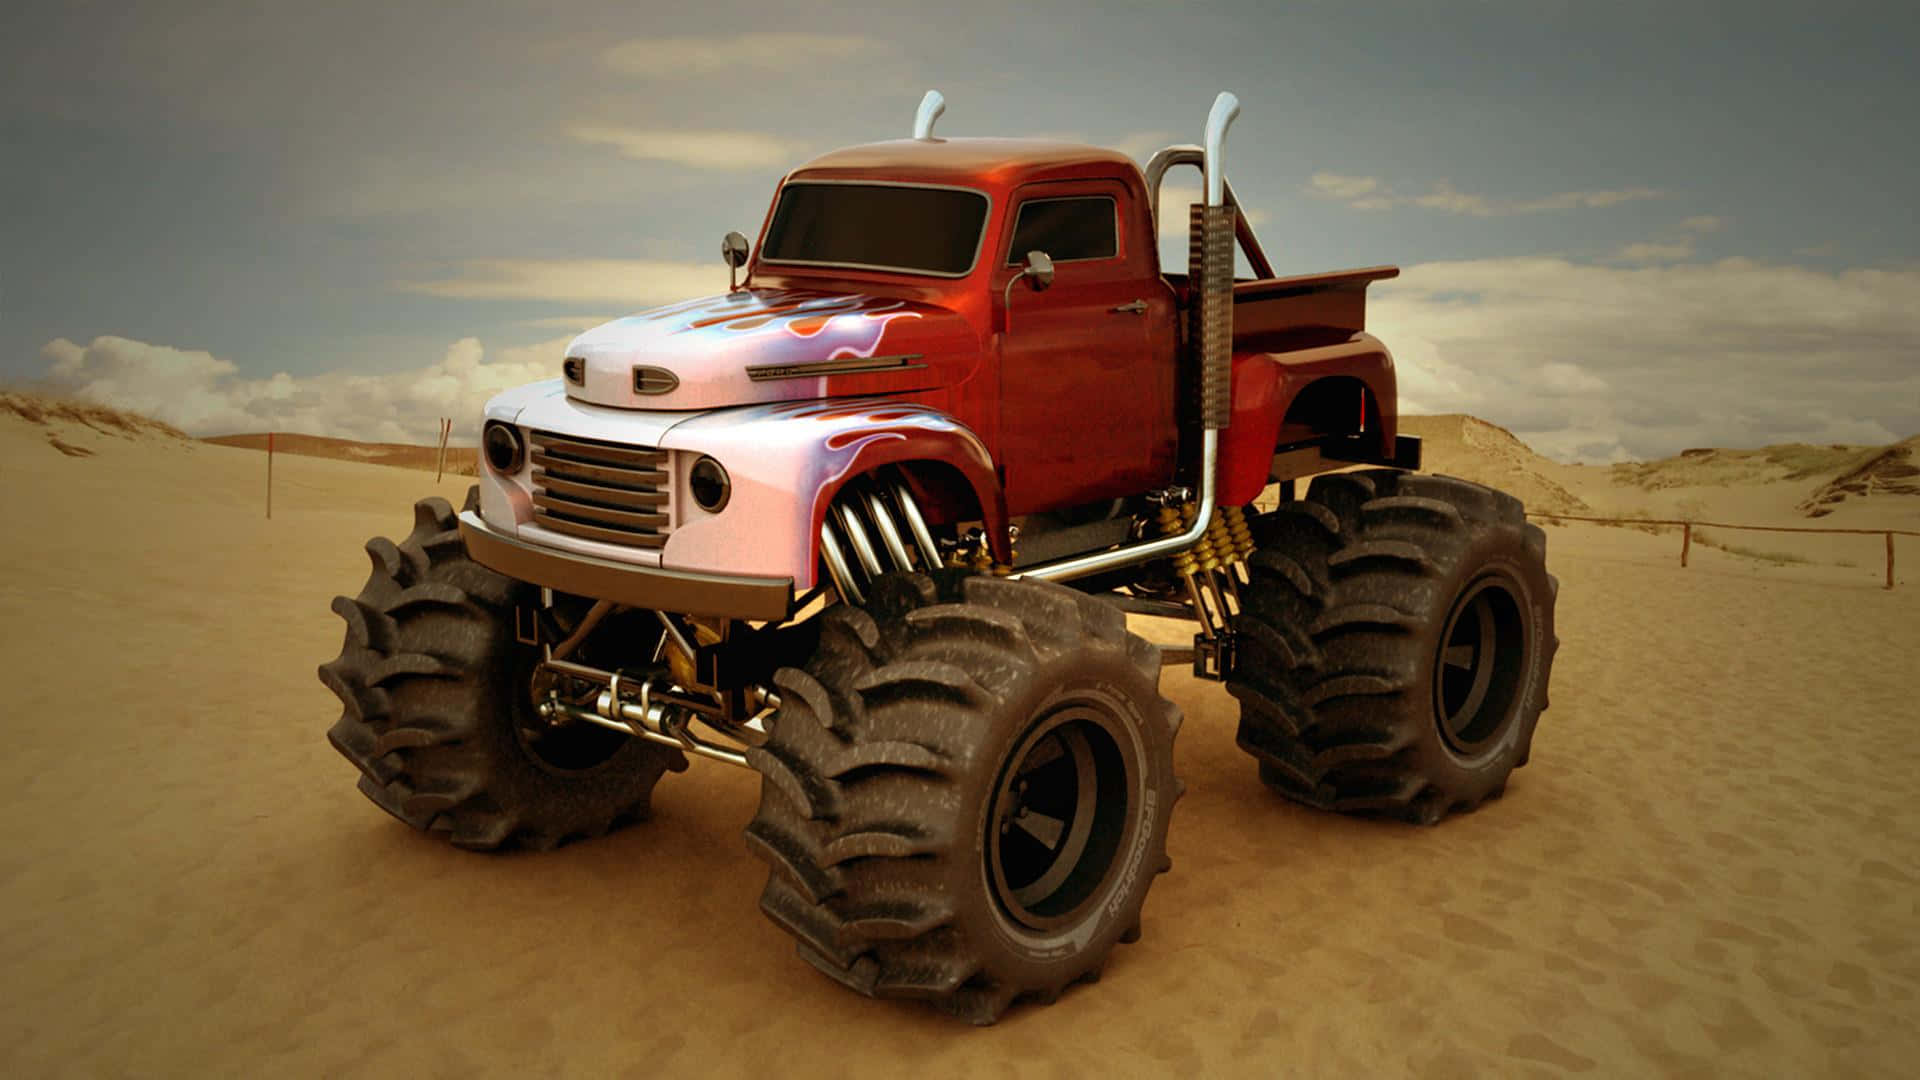 Red Monster Truck With White And Blue Flame Wallpaper